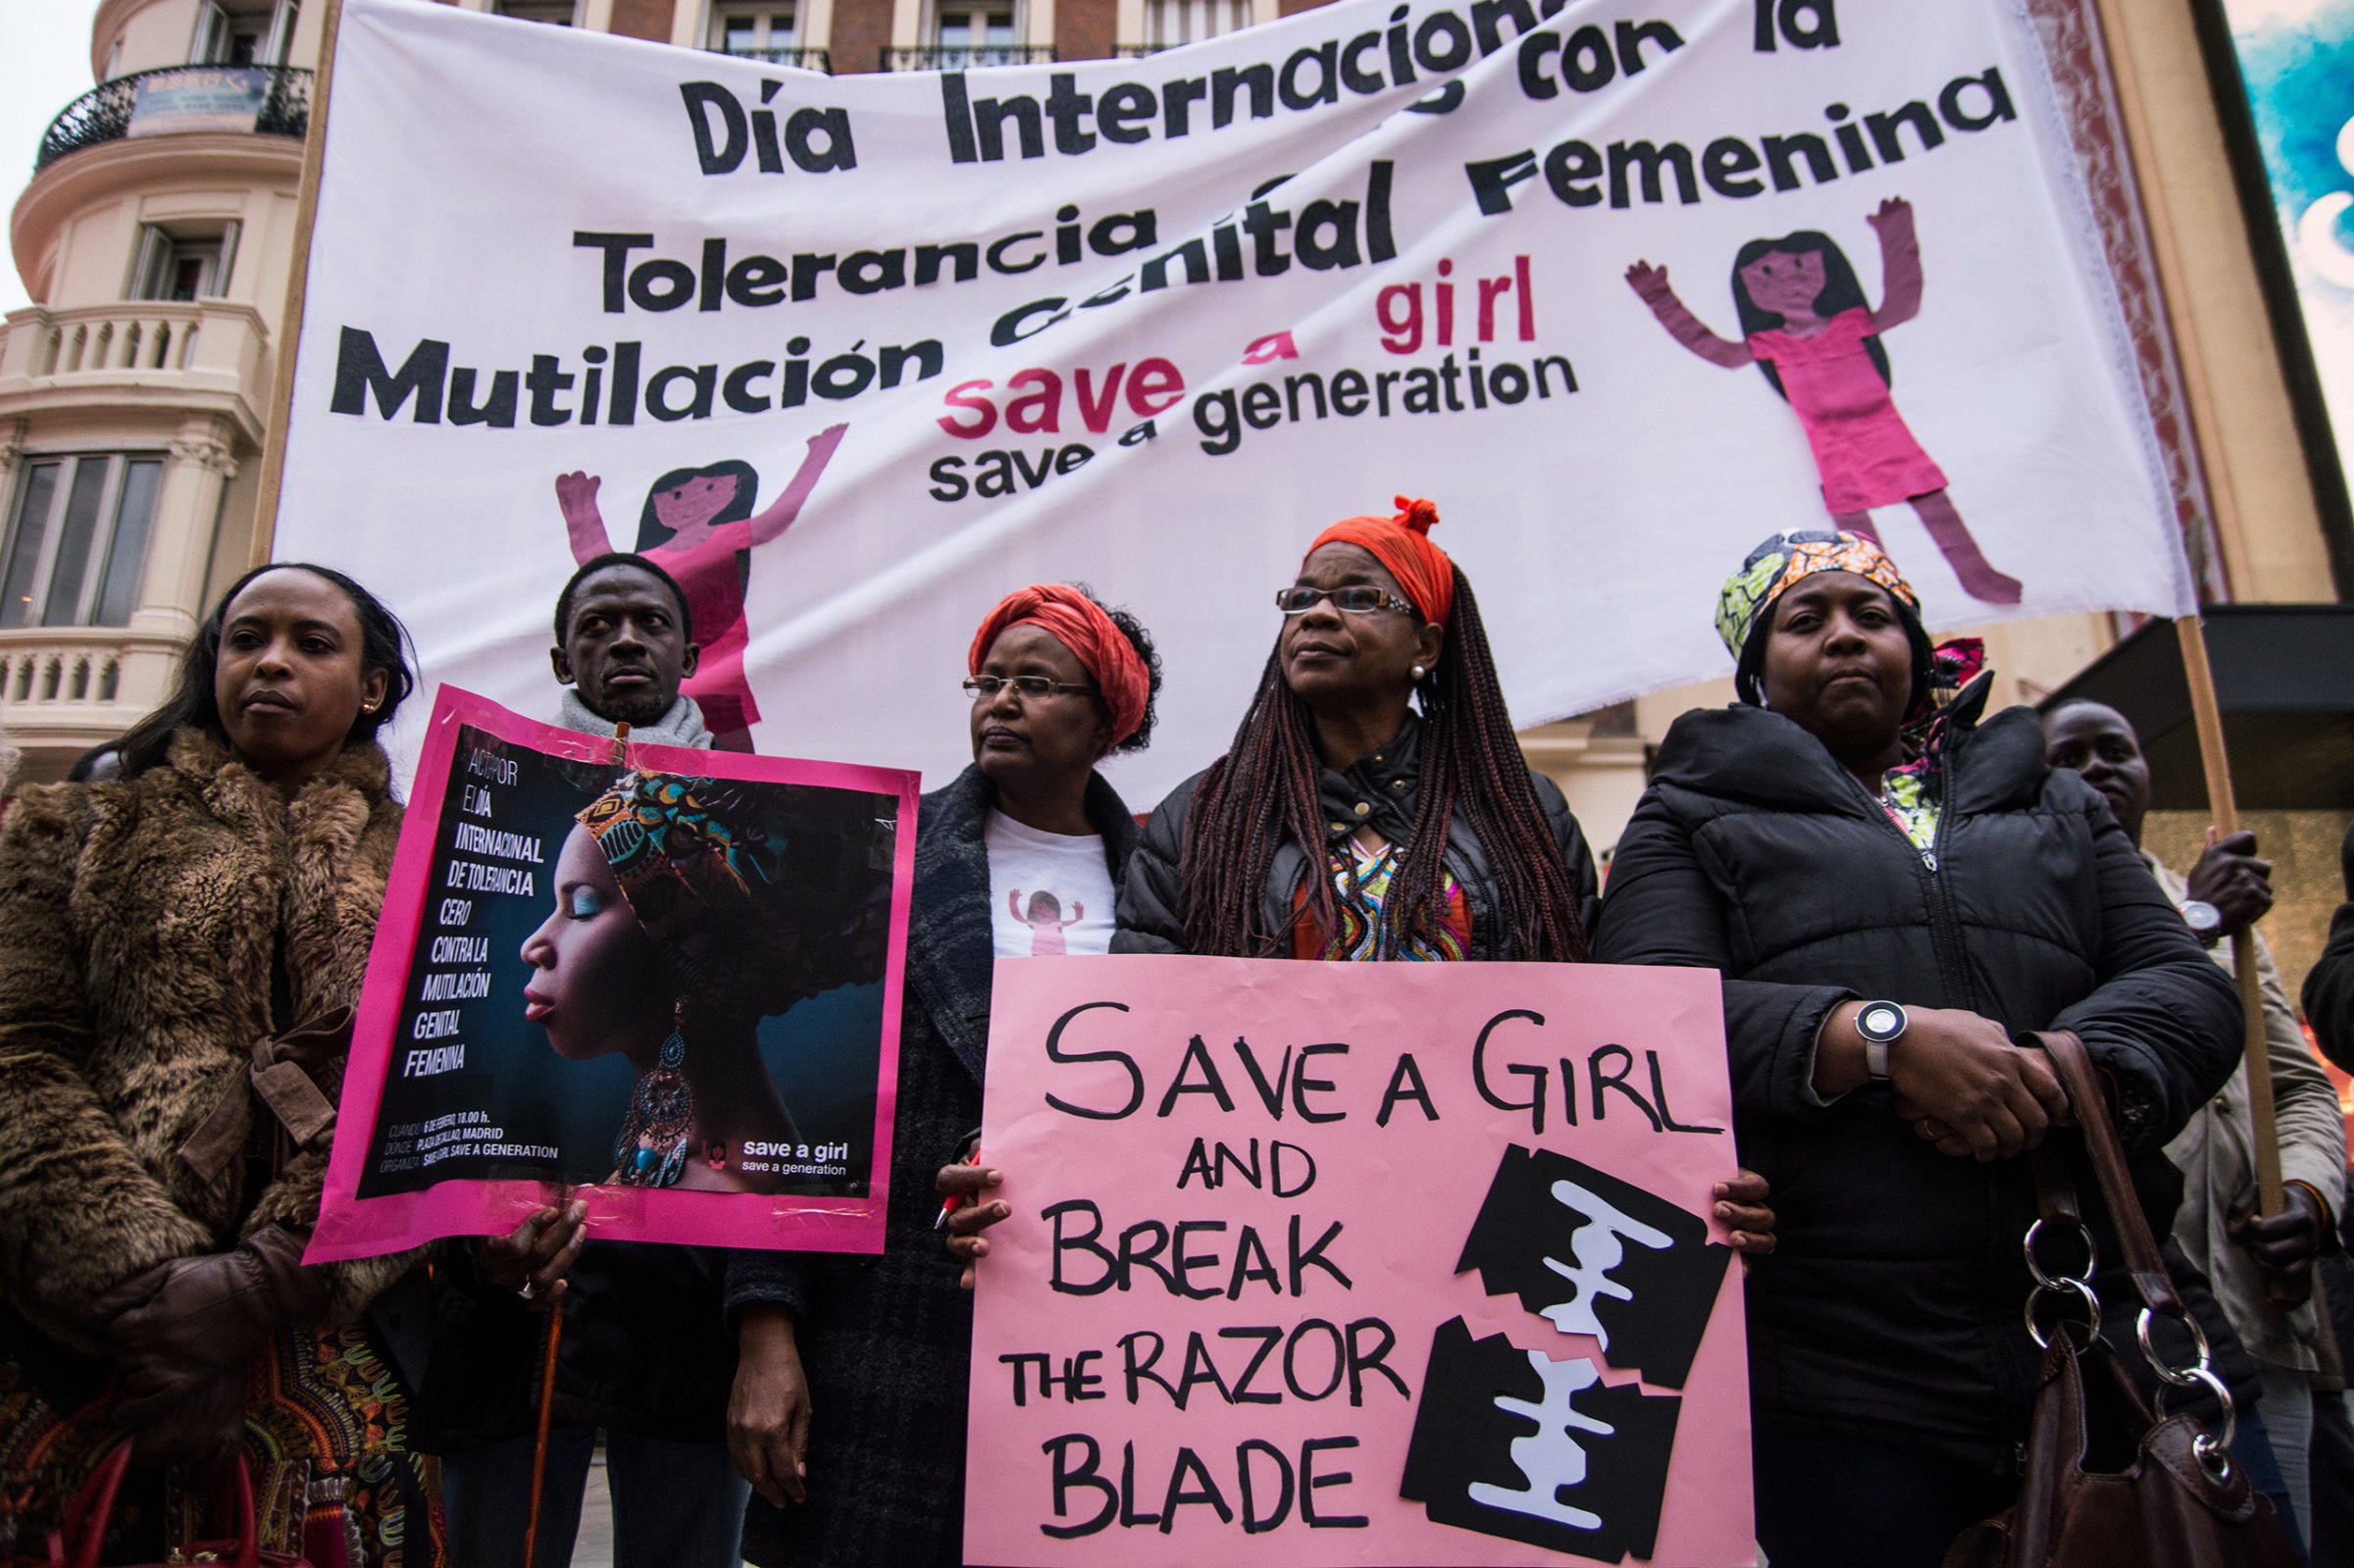 People protest during a rally marking International Day of Zero Tolerance to Female Genital Mutilation in Madrid on Feb. 6, 2016.